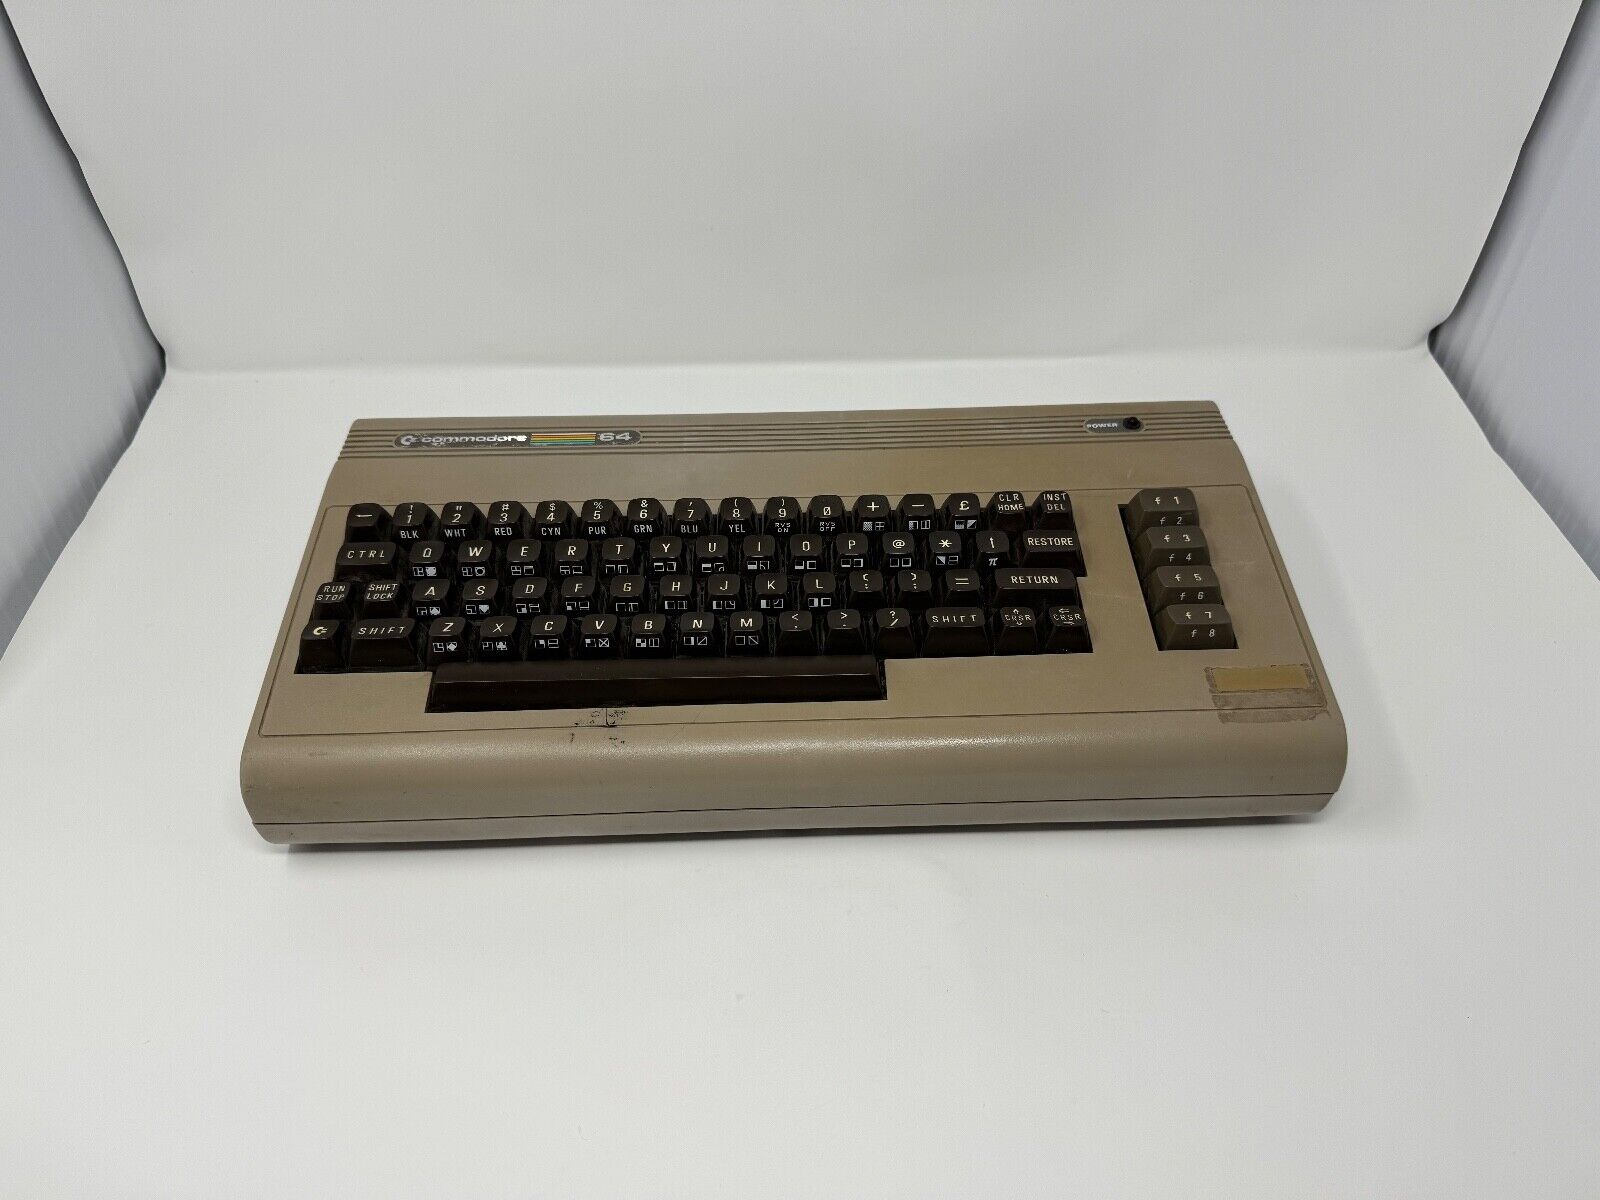 Vintage Commodore 64 Personal Computer System - Untested, As-Is